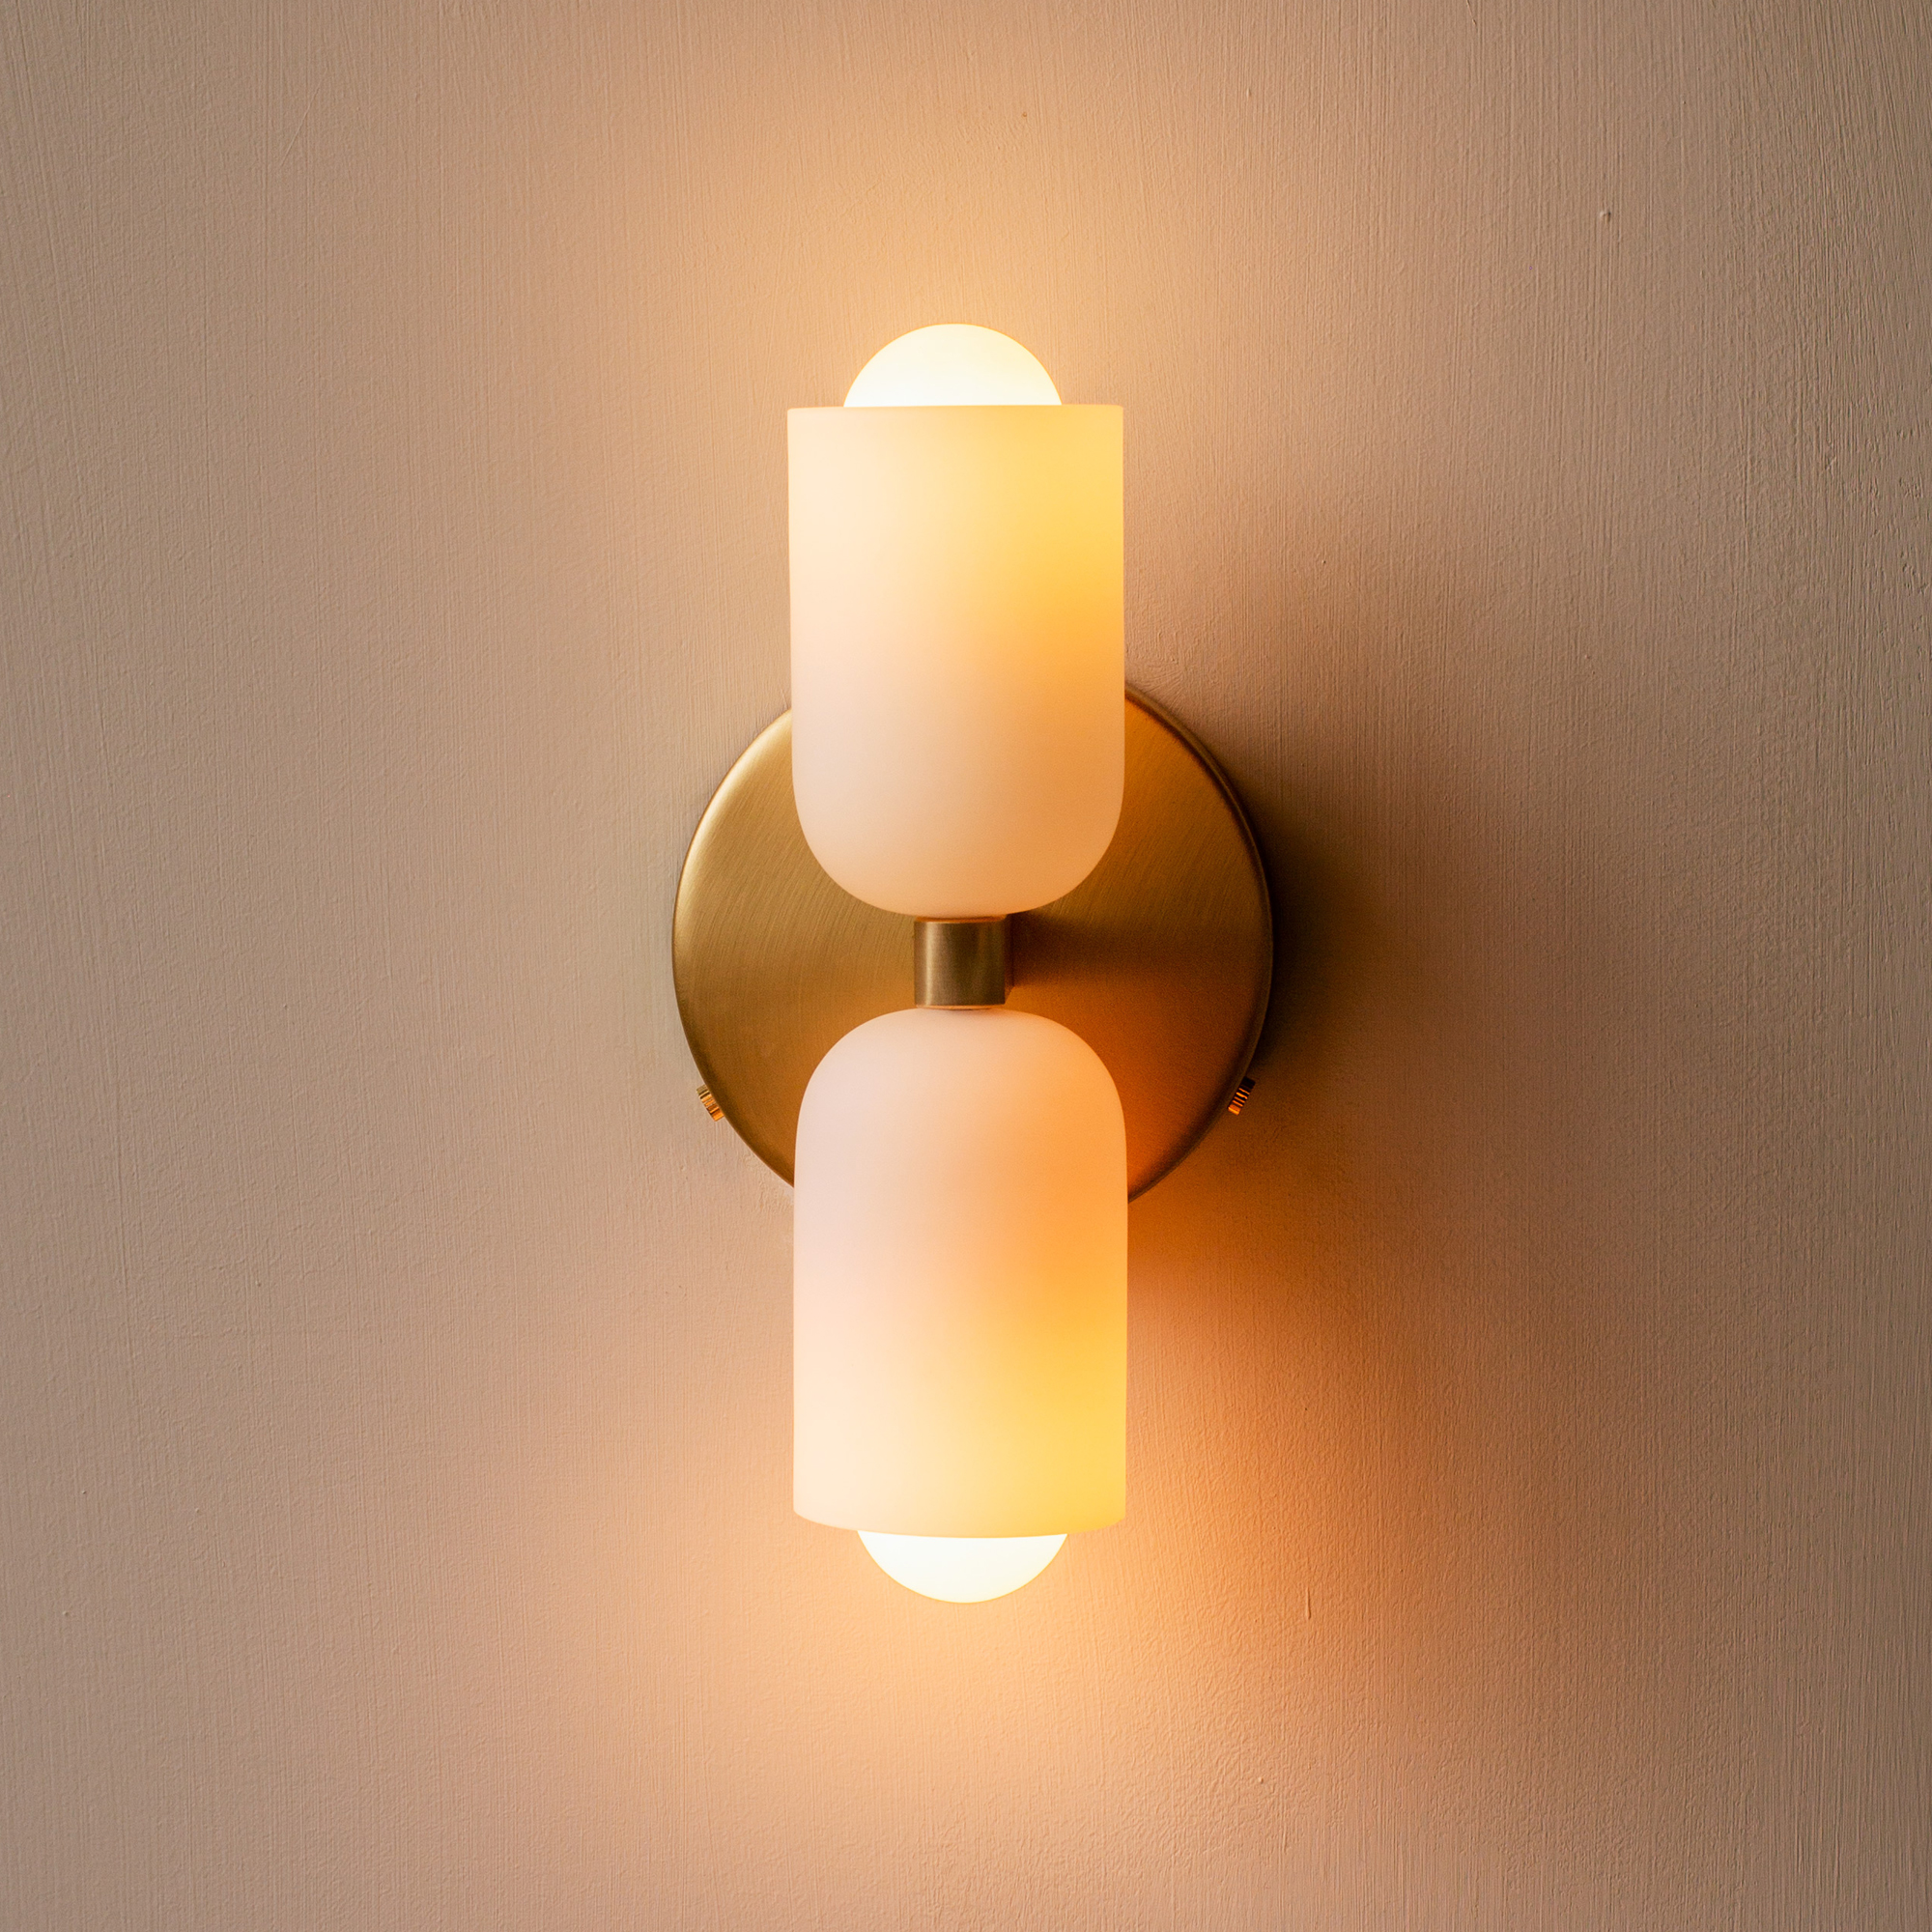 støbt emulsion lotus Glass Up Down Wall Sconce by In Common With | SP-100913 | ICW1009392